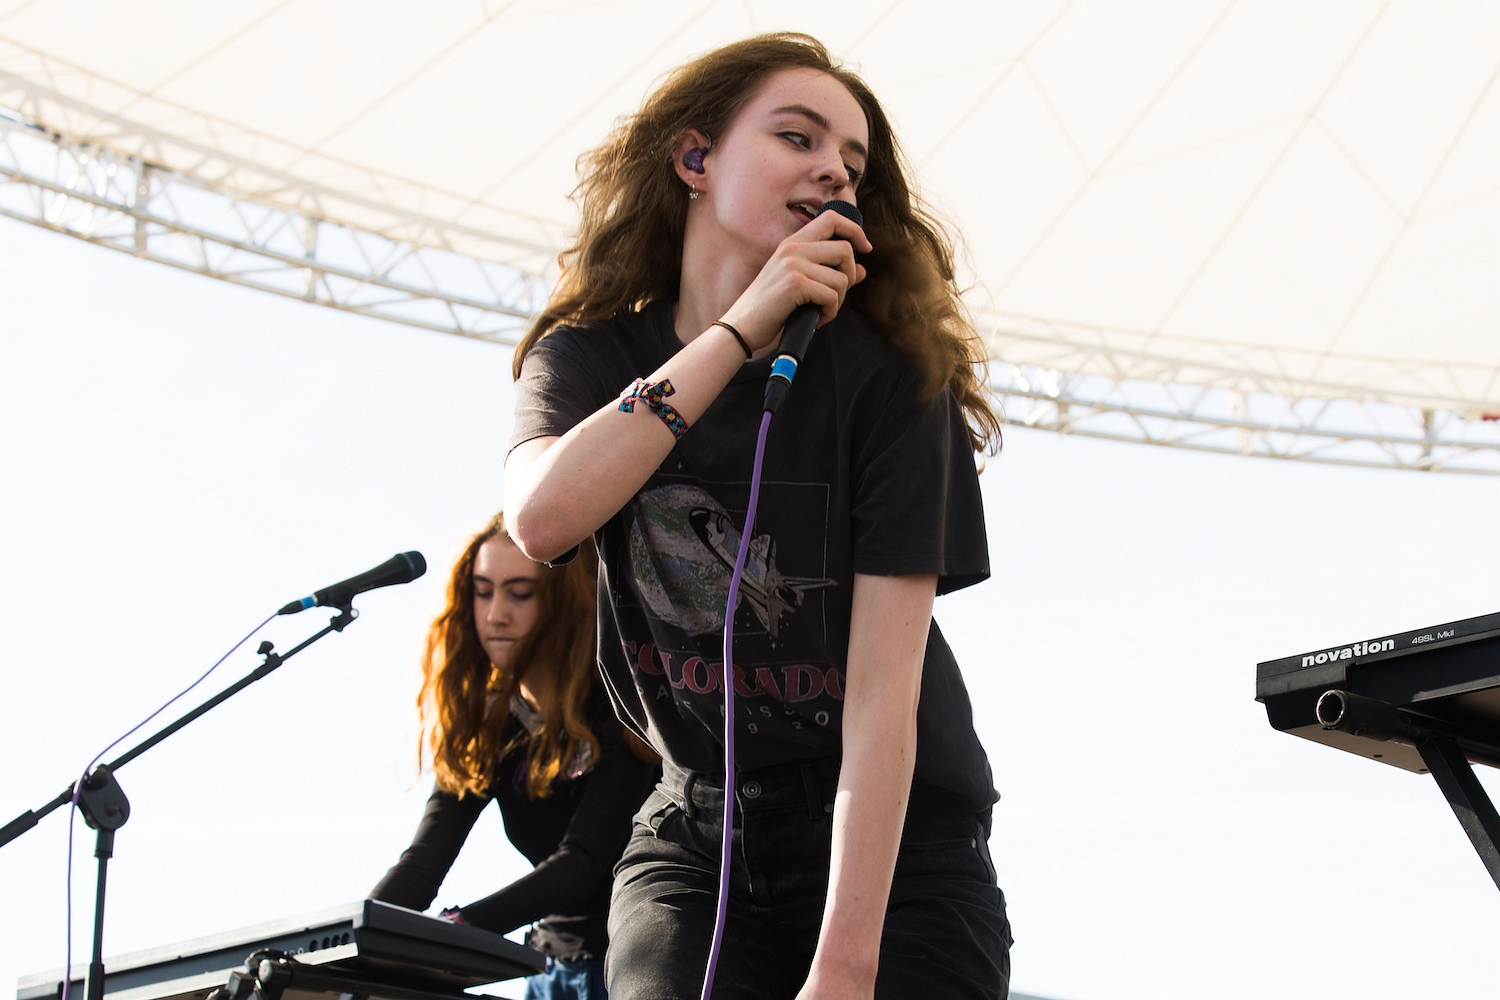 Let’s Eat Grandma to support Chvrches on European tour